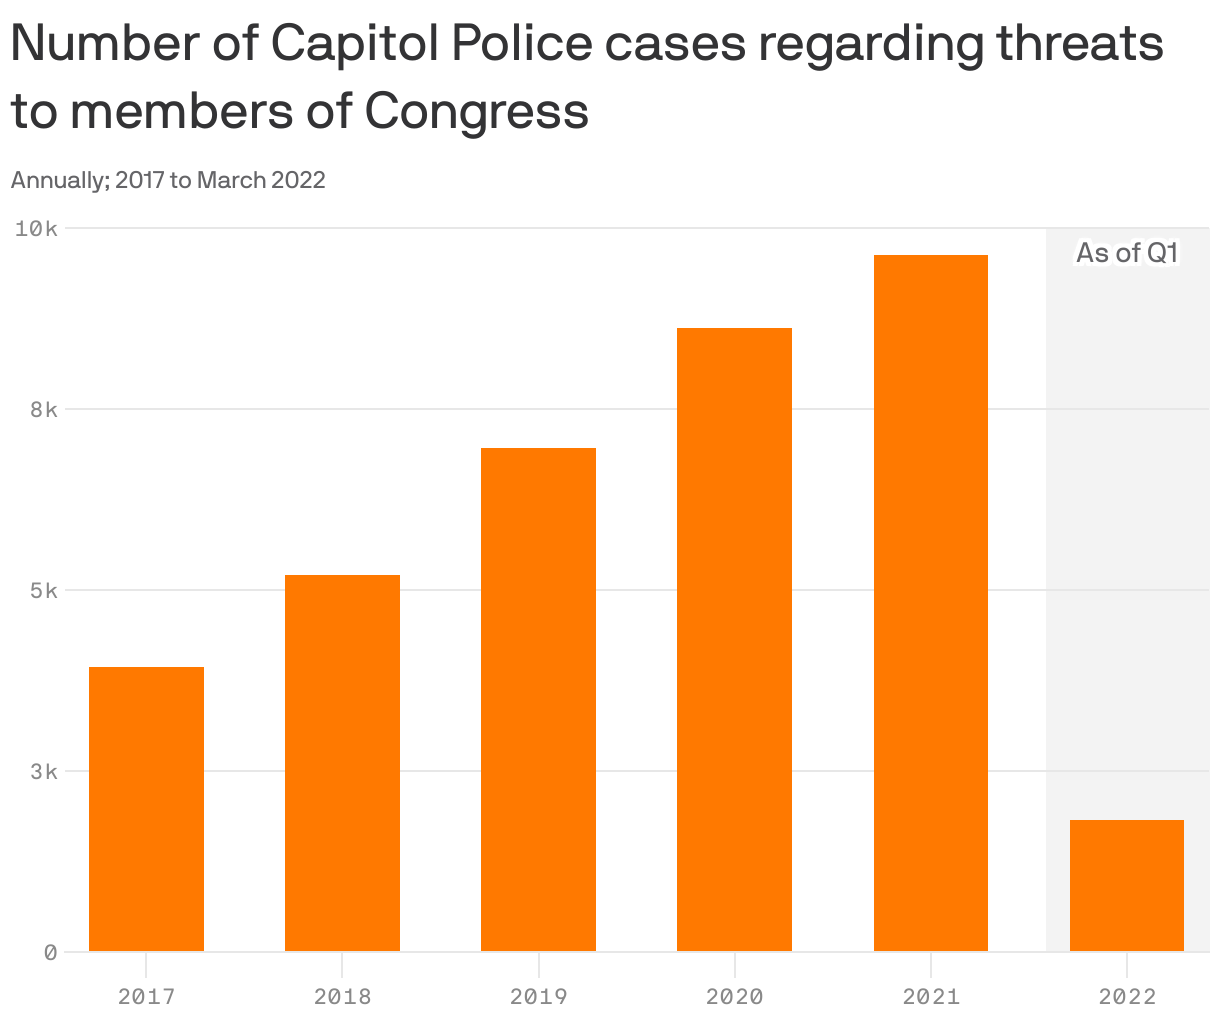 Number of Capitol Police cases regarding threats to members of Congress